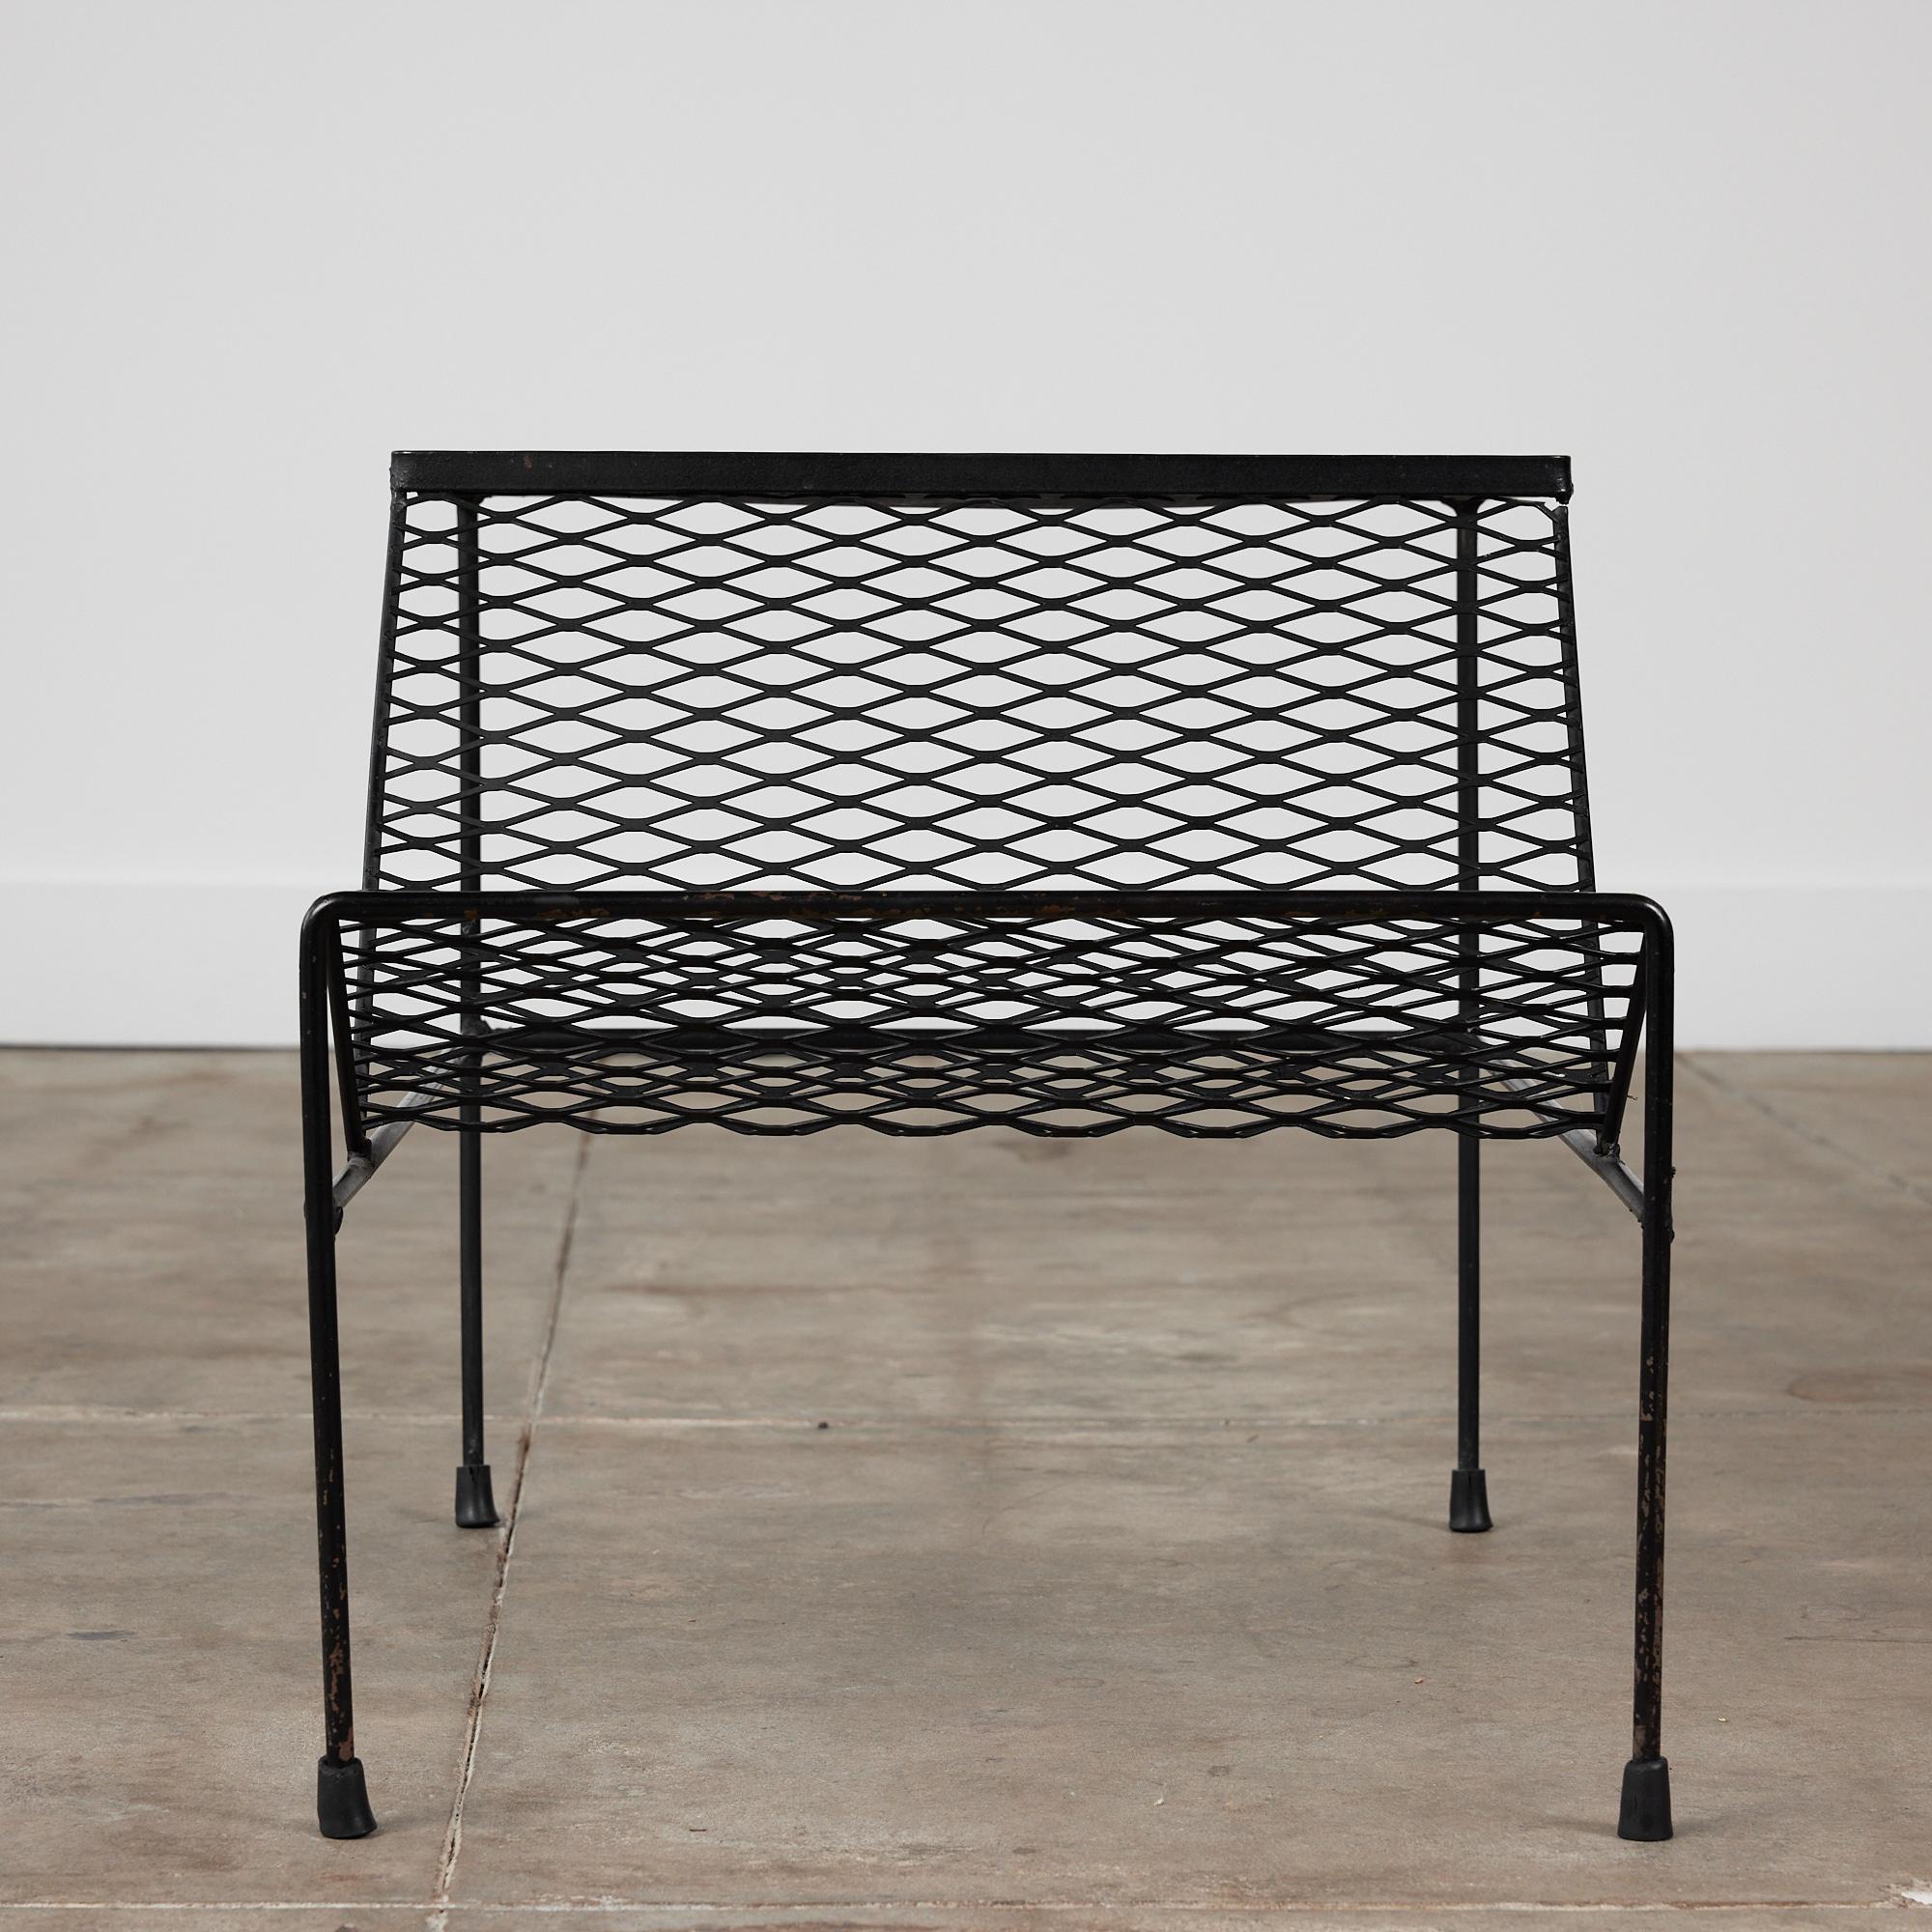 Powder-Coated Expanded Metal Side Table with Magazine Rack